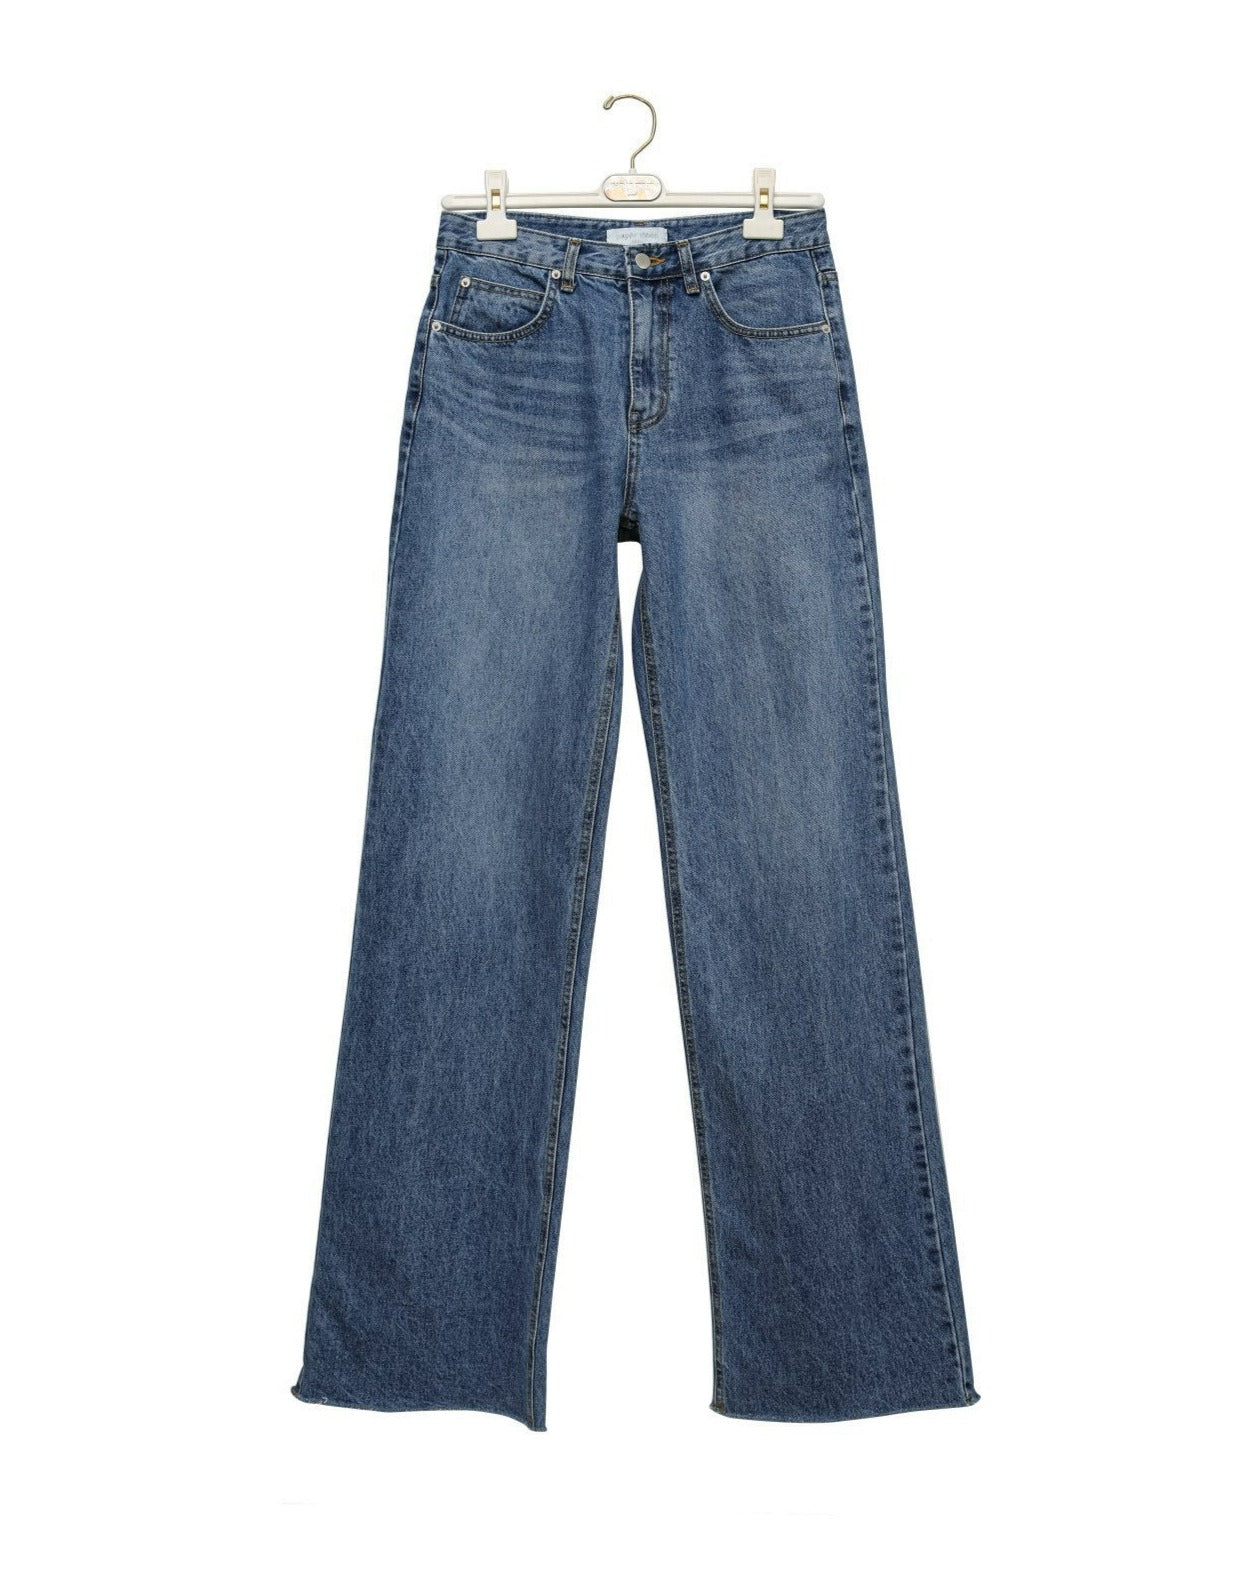 【PAPERMOON 페이퍼 문】SS / Classic Raw - Cut Wide Fit Mid Blue Jeans